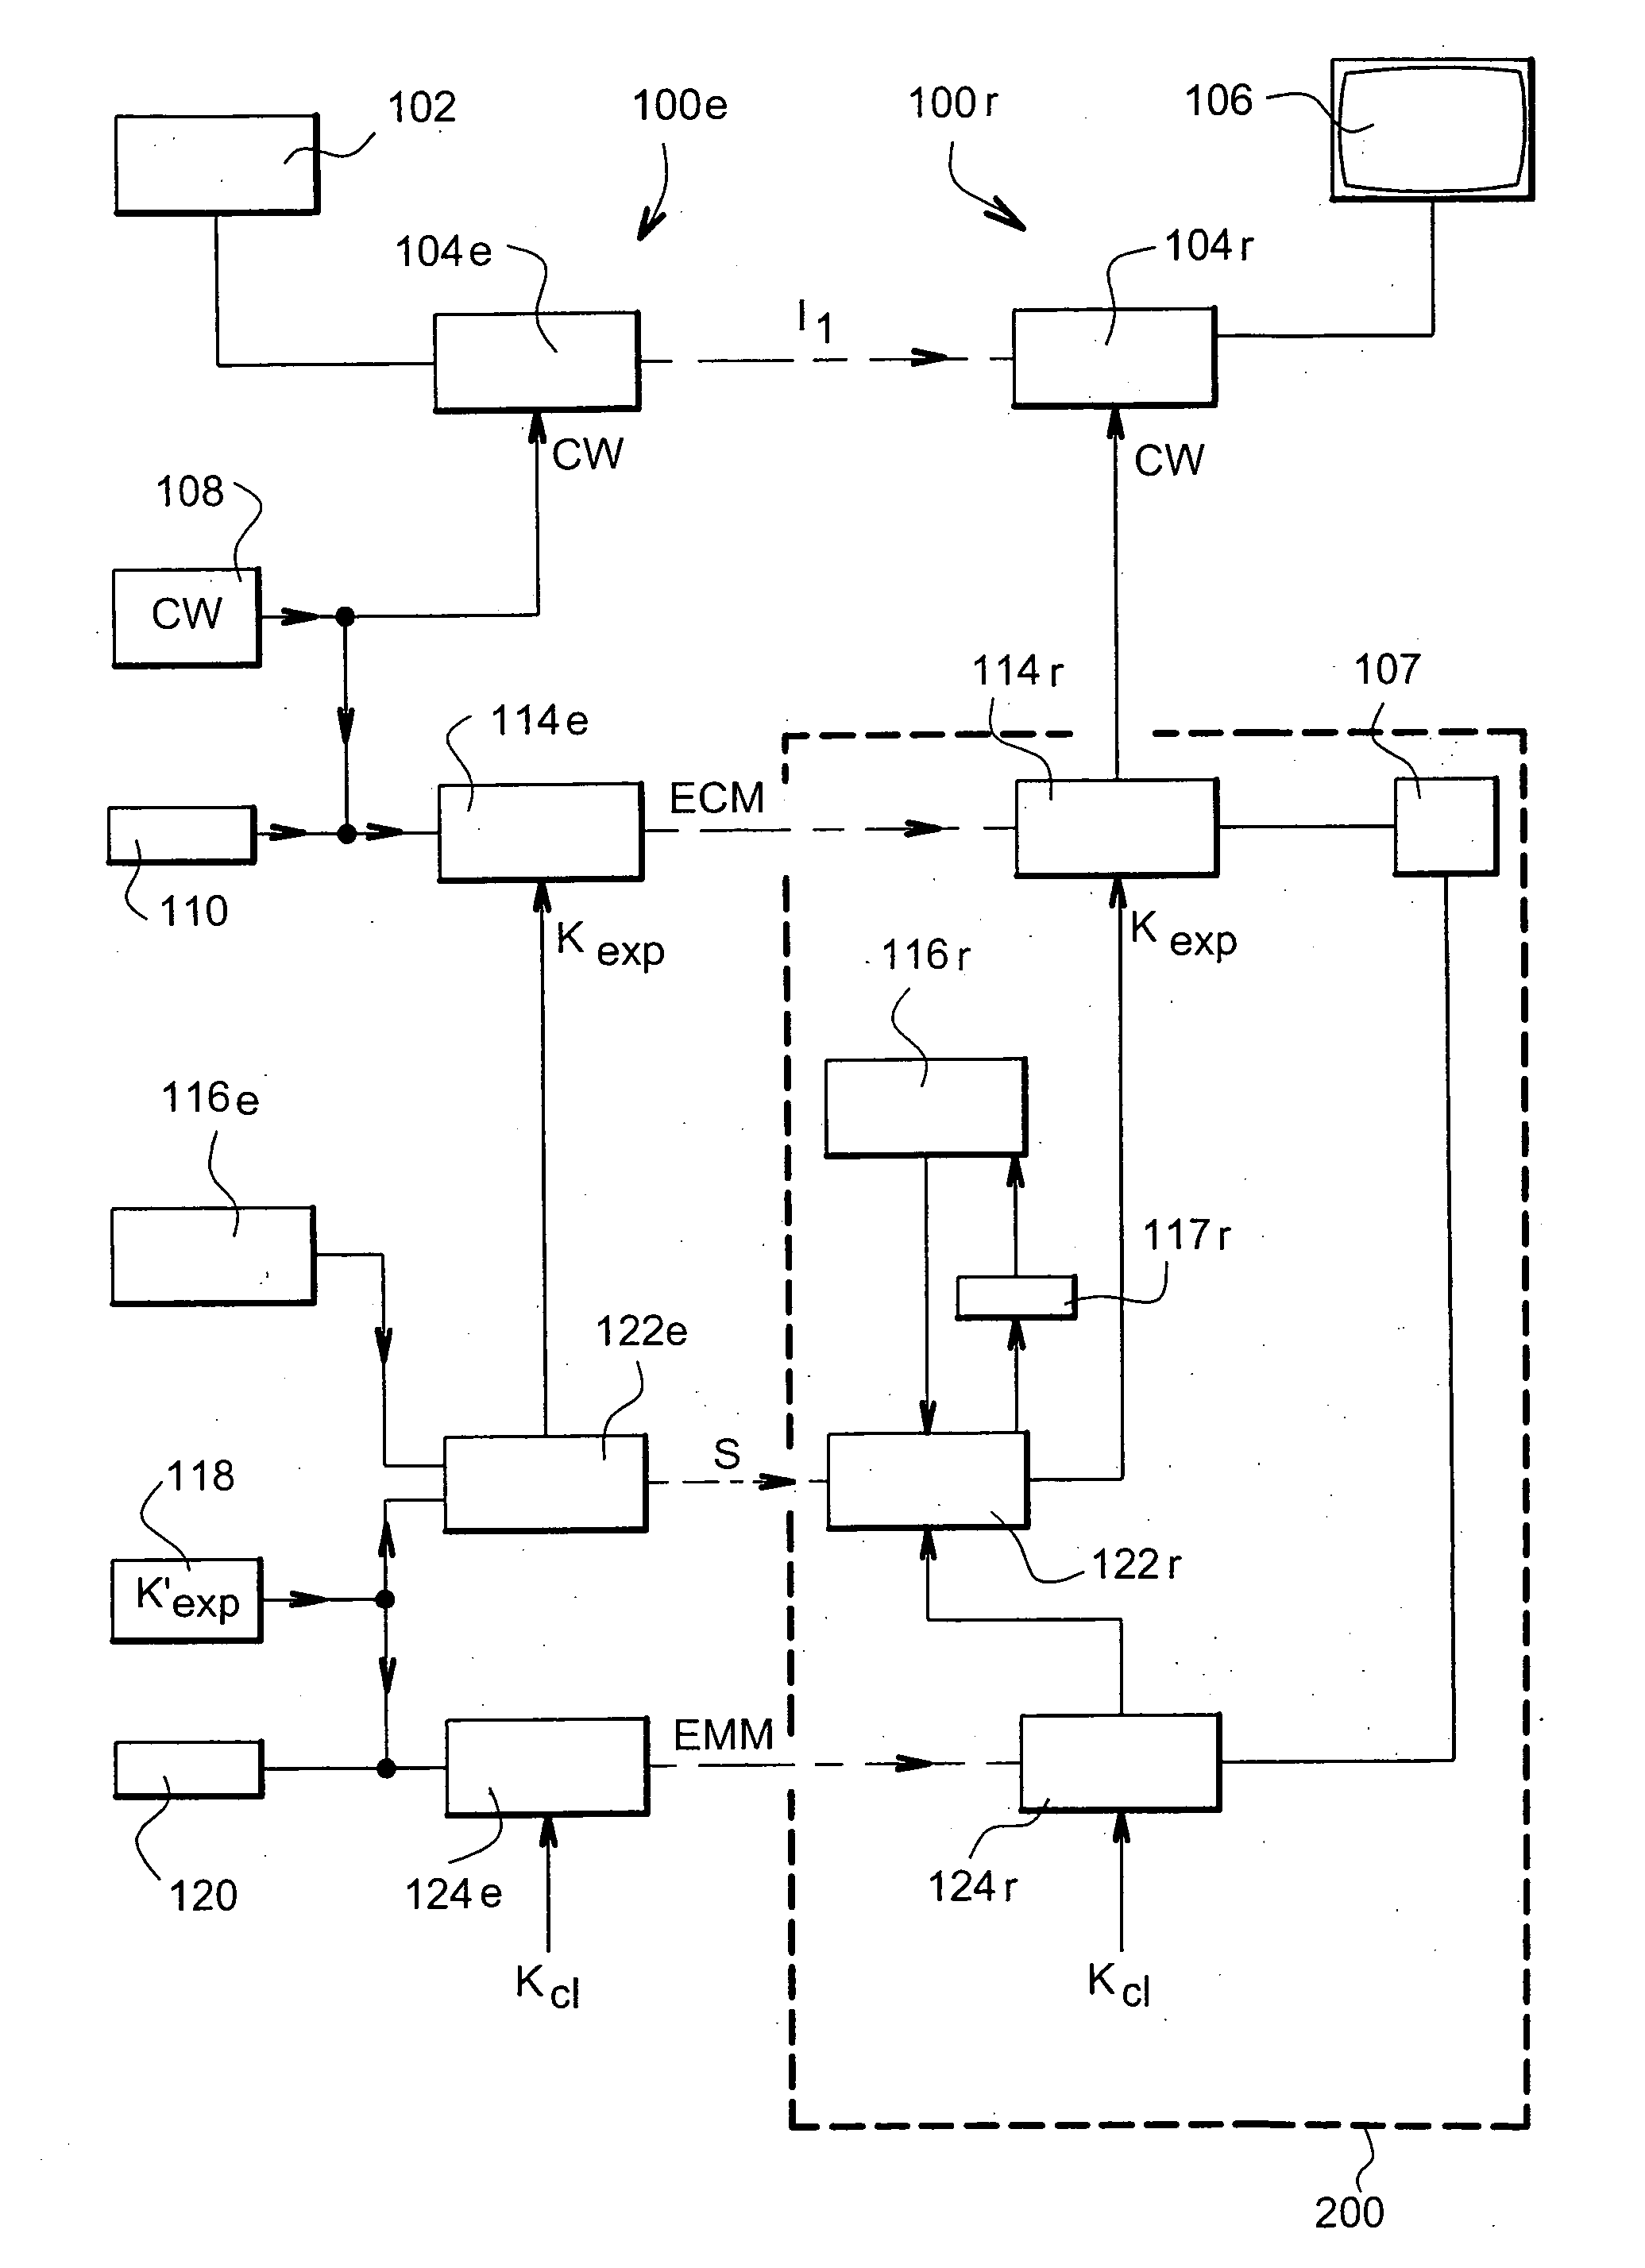 System and methods for transmitting encrypted data with encryption key